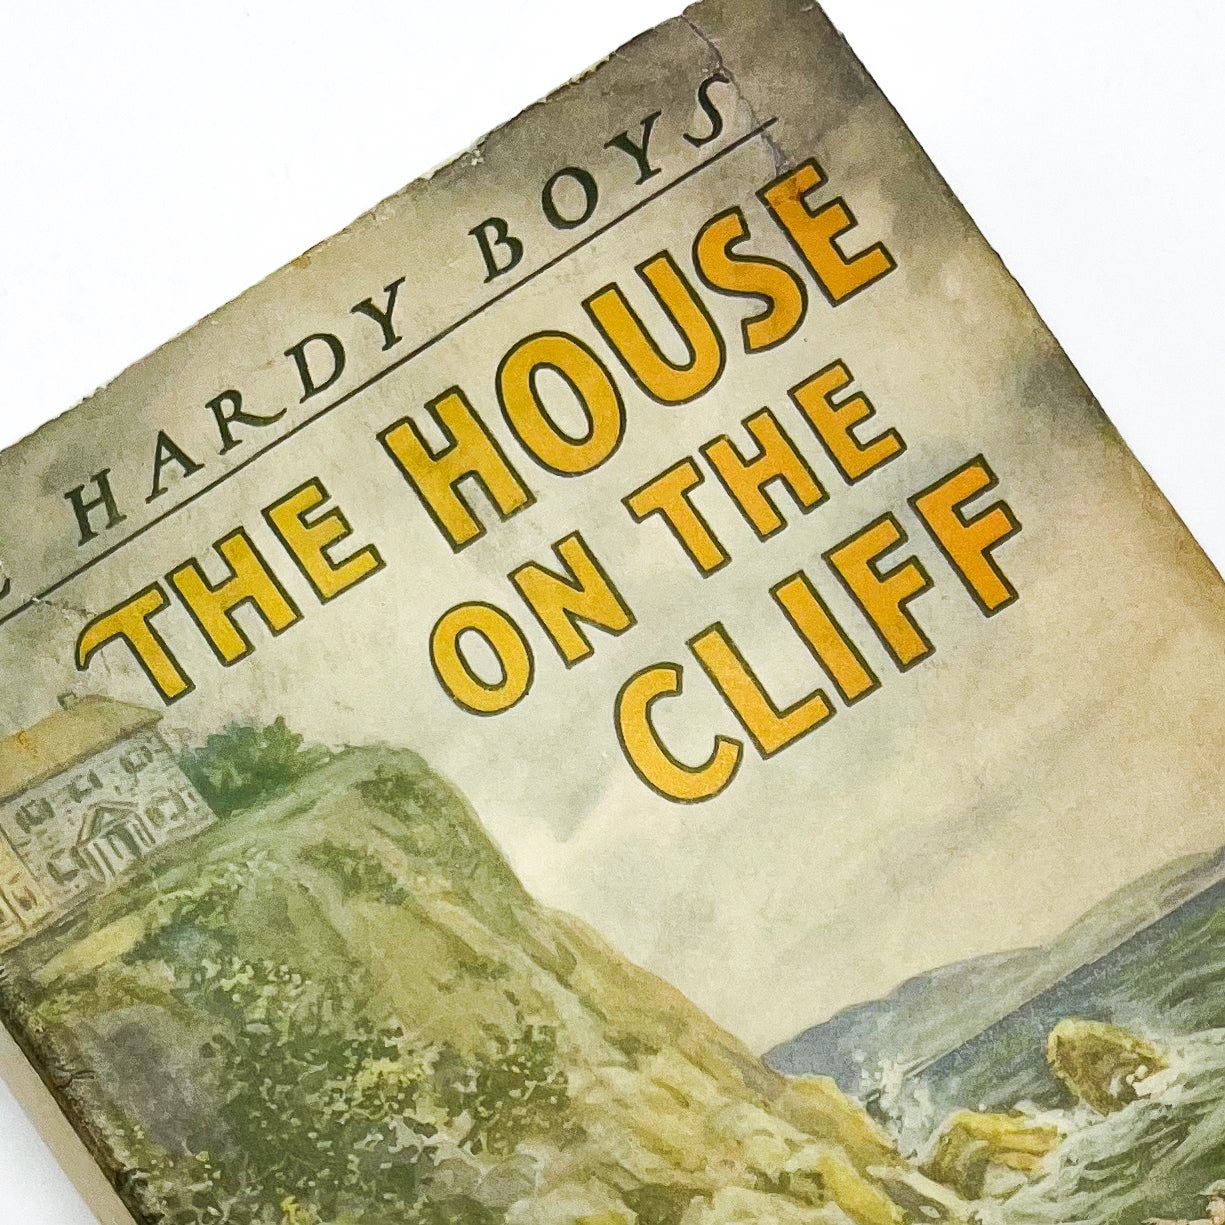 First Edition Of One Of The Earliest Hardy Boys Books